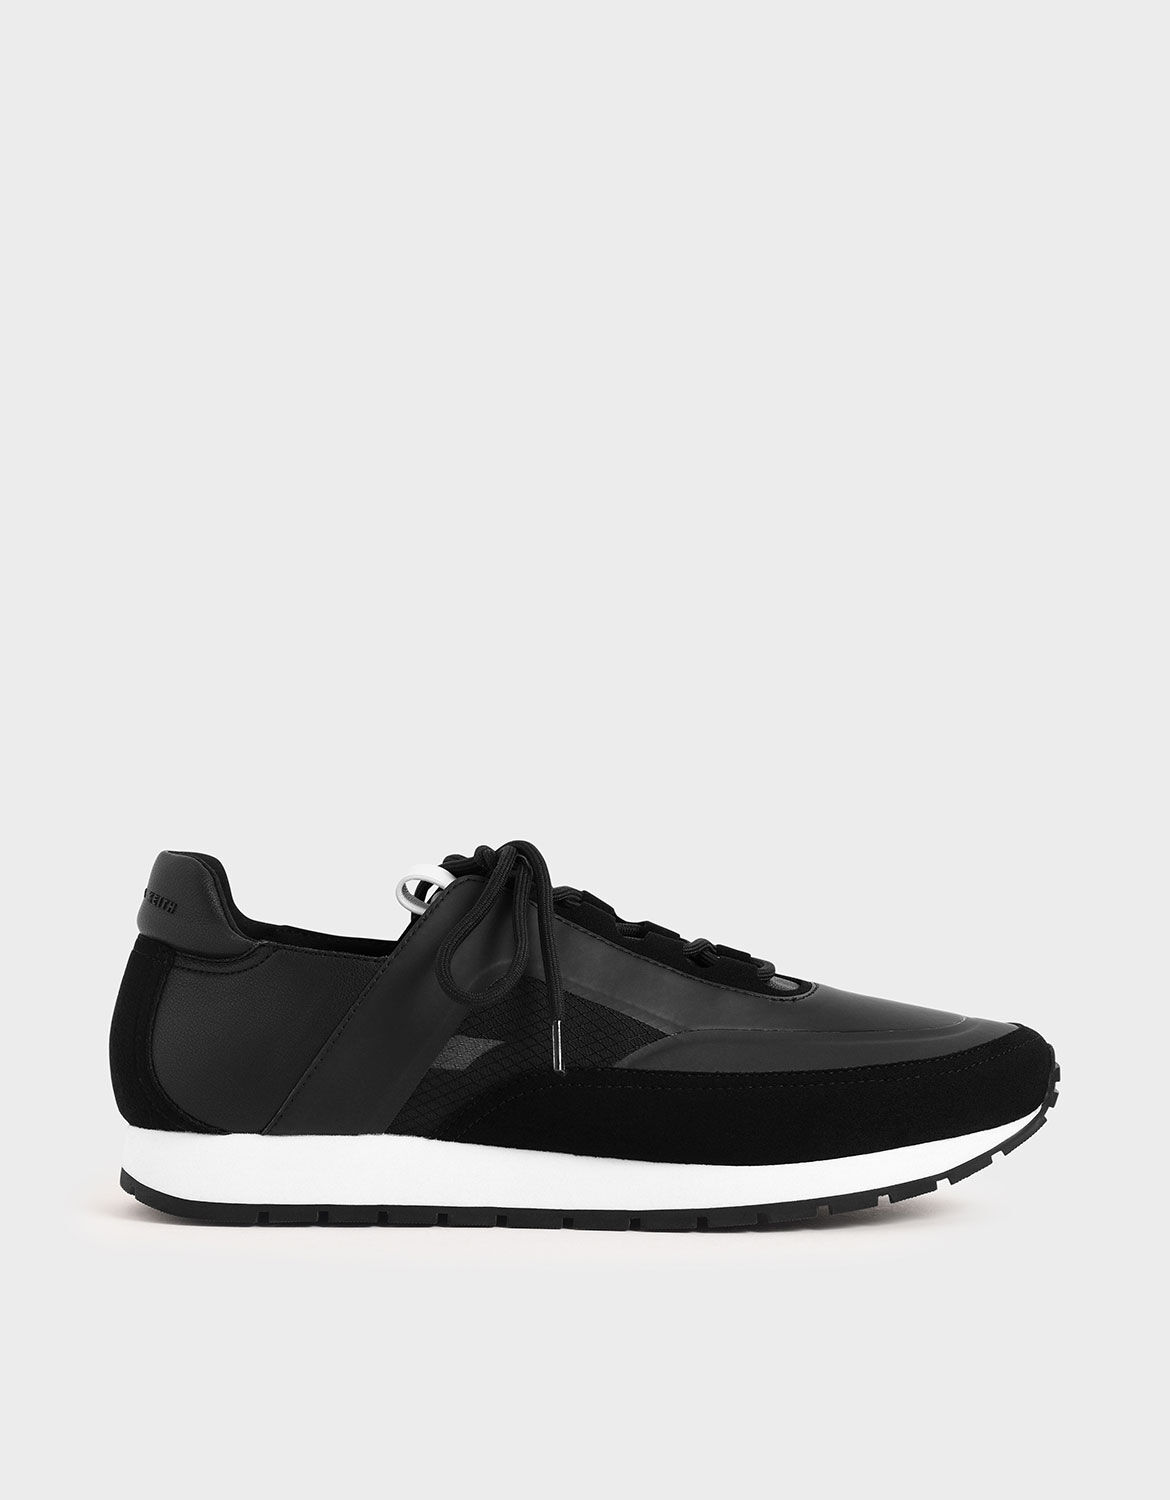 Black Lace-Up Trainers | CHARLES \u0026 KEITH MO